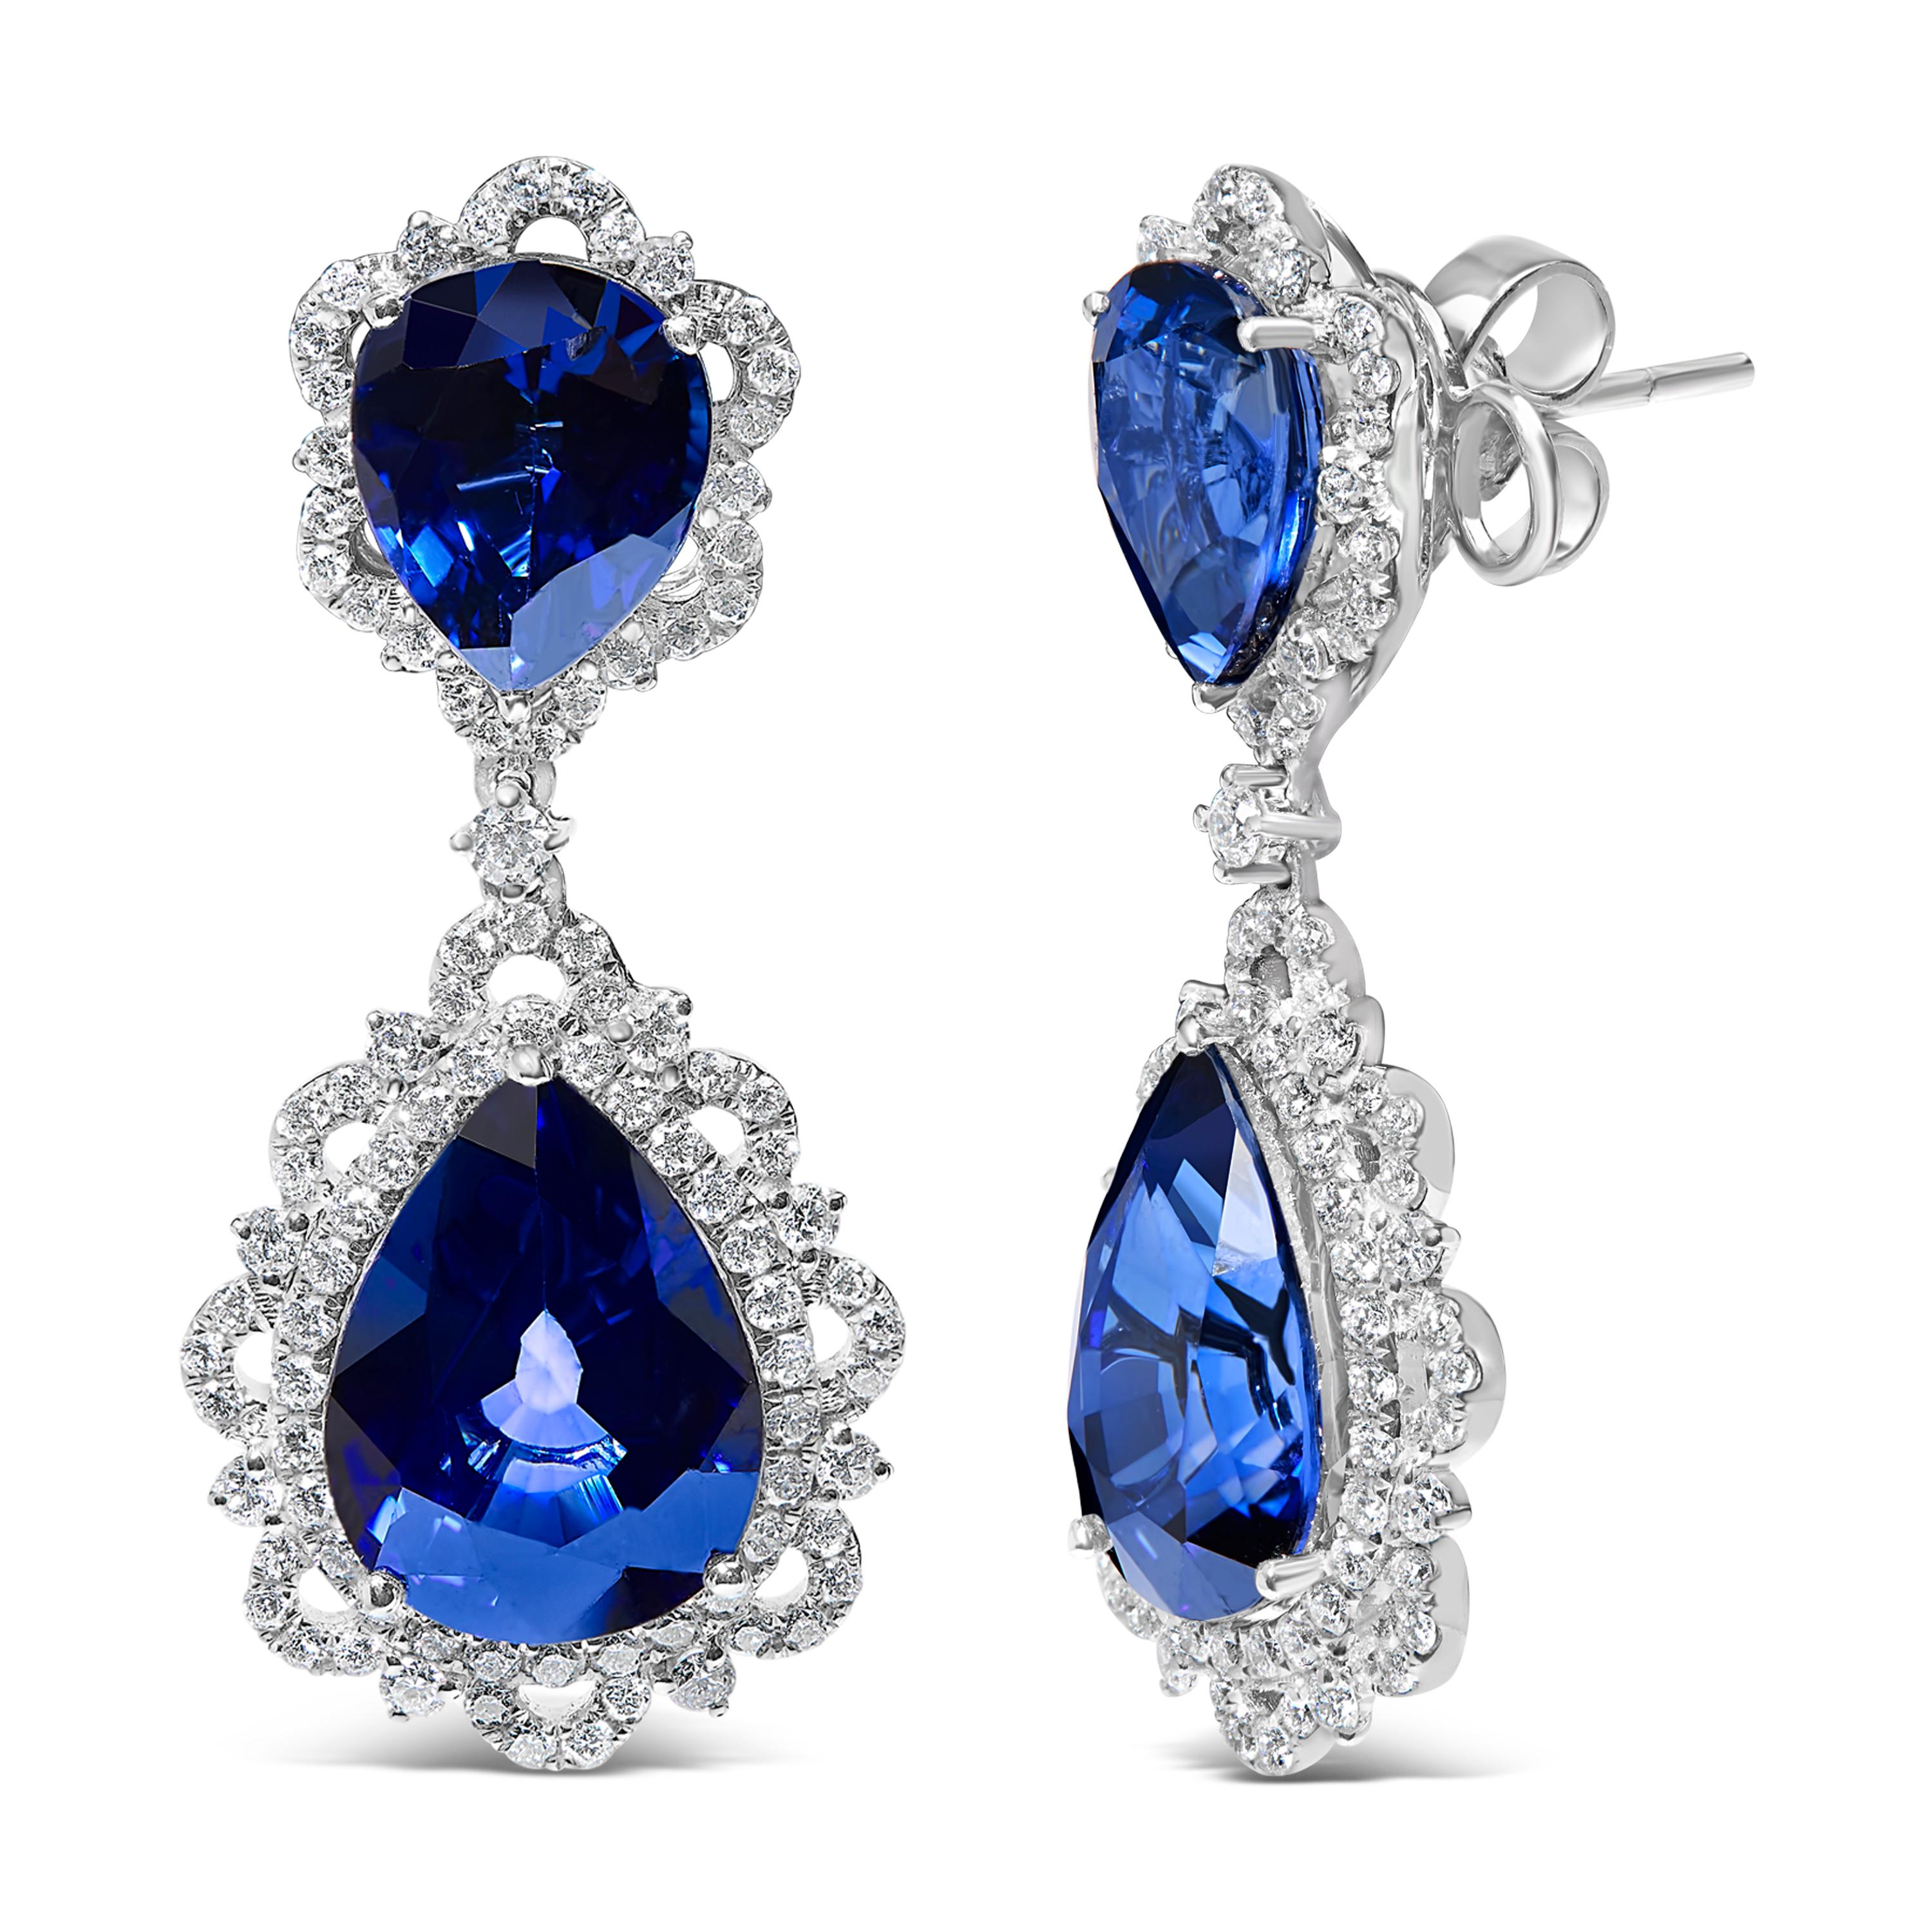 Embrace the allure of sophistication with these stunning 18K white gold earrings, adorned with pear-shaped blue sapphires and encircled by halos of dazzling diamonds. With a total diamond weight of 2 carats, the sparkle contrasts beautifully against